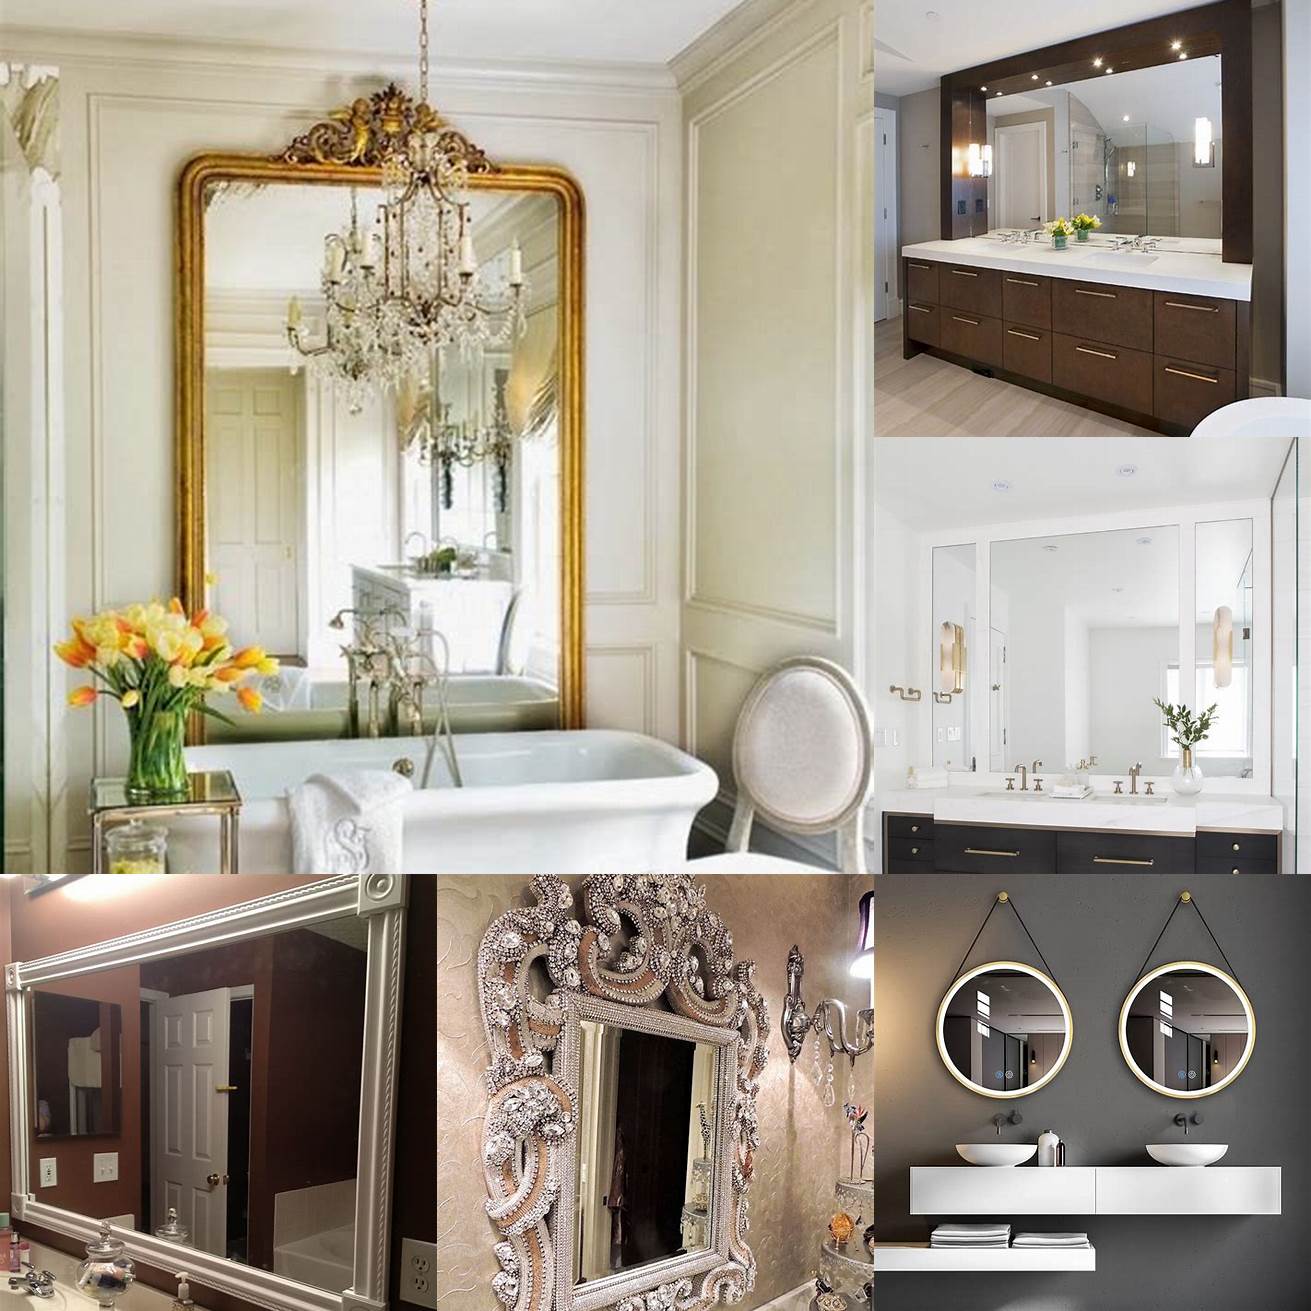 Oversized mirrors give a dramatic and luxurious feel to your bathroom